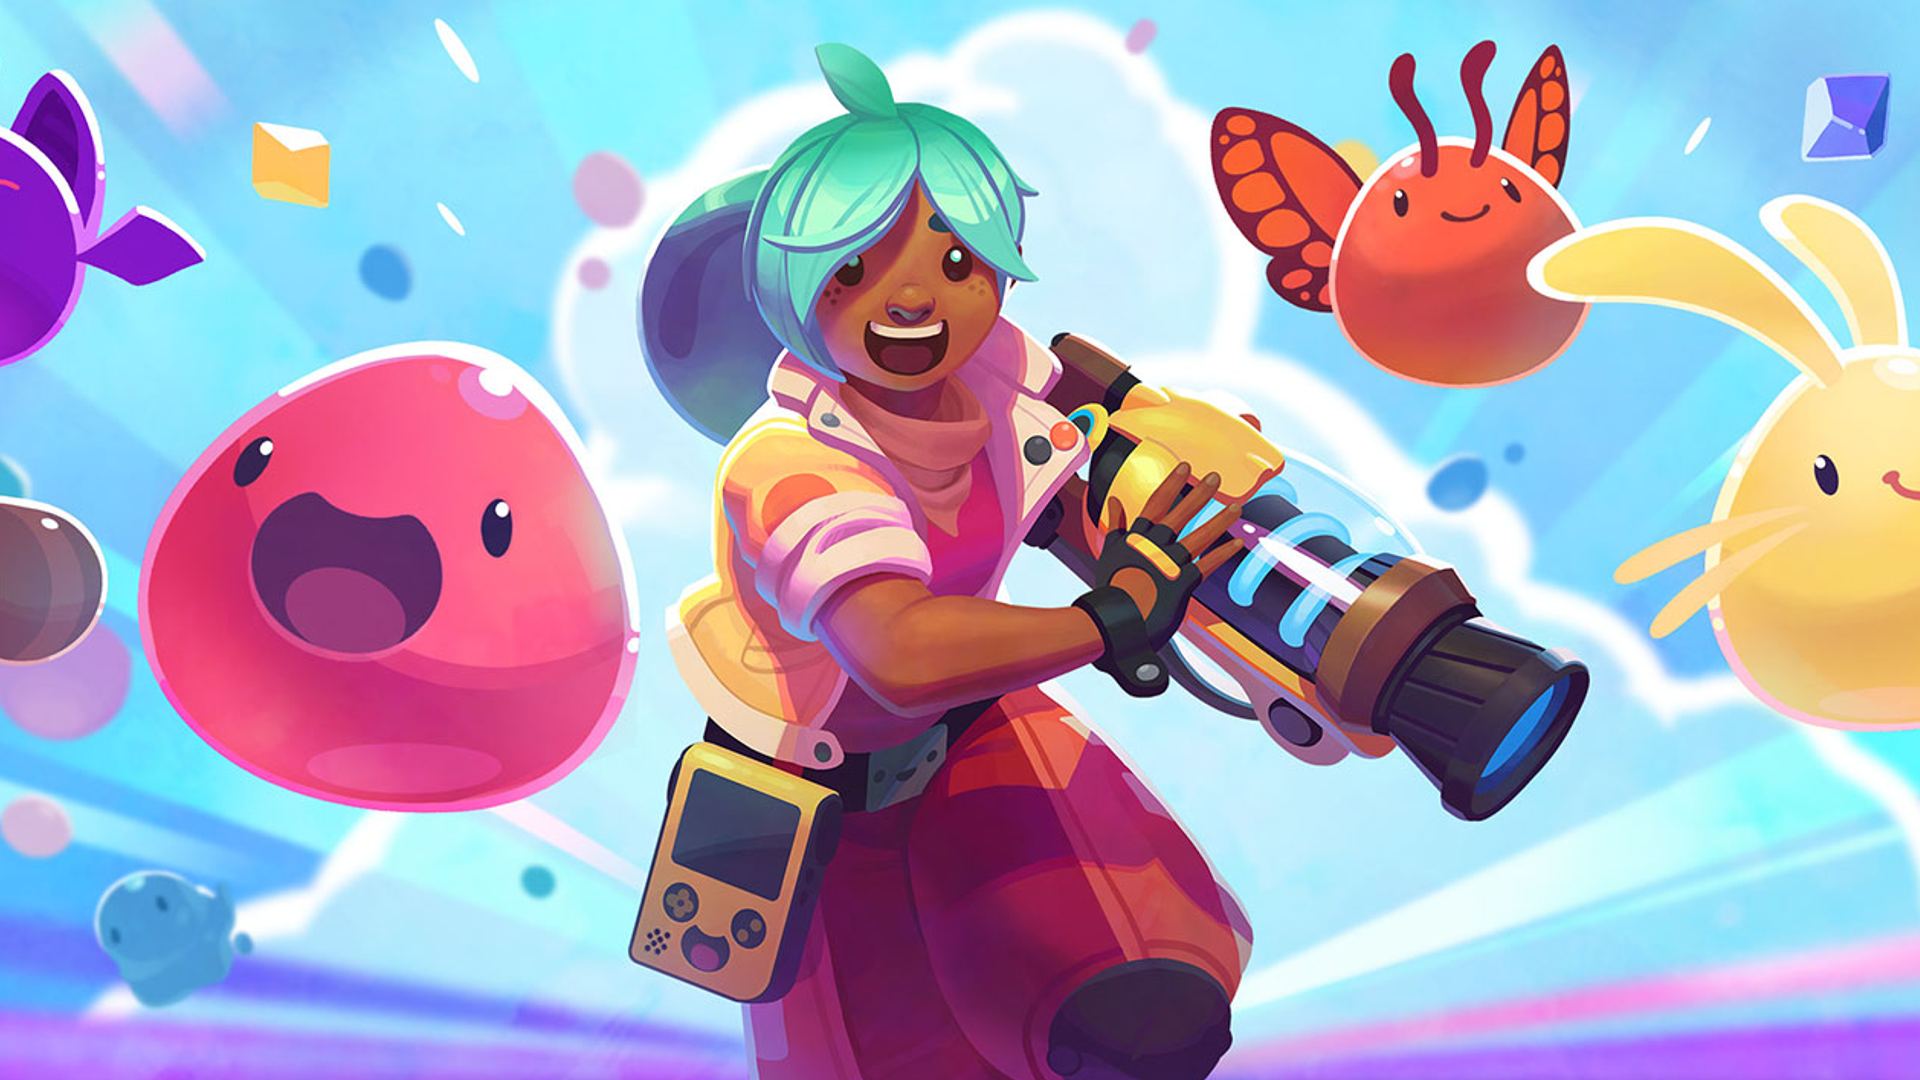 Slime Rancher 2: The main character can be seen alongside some slimes